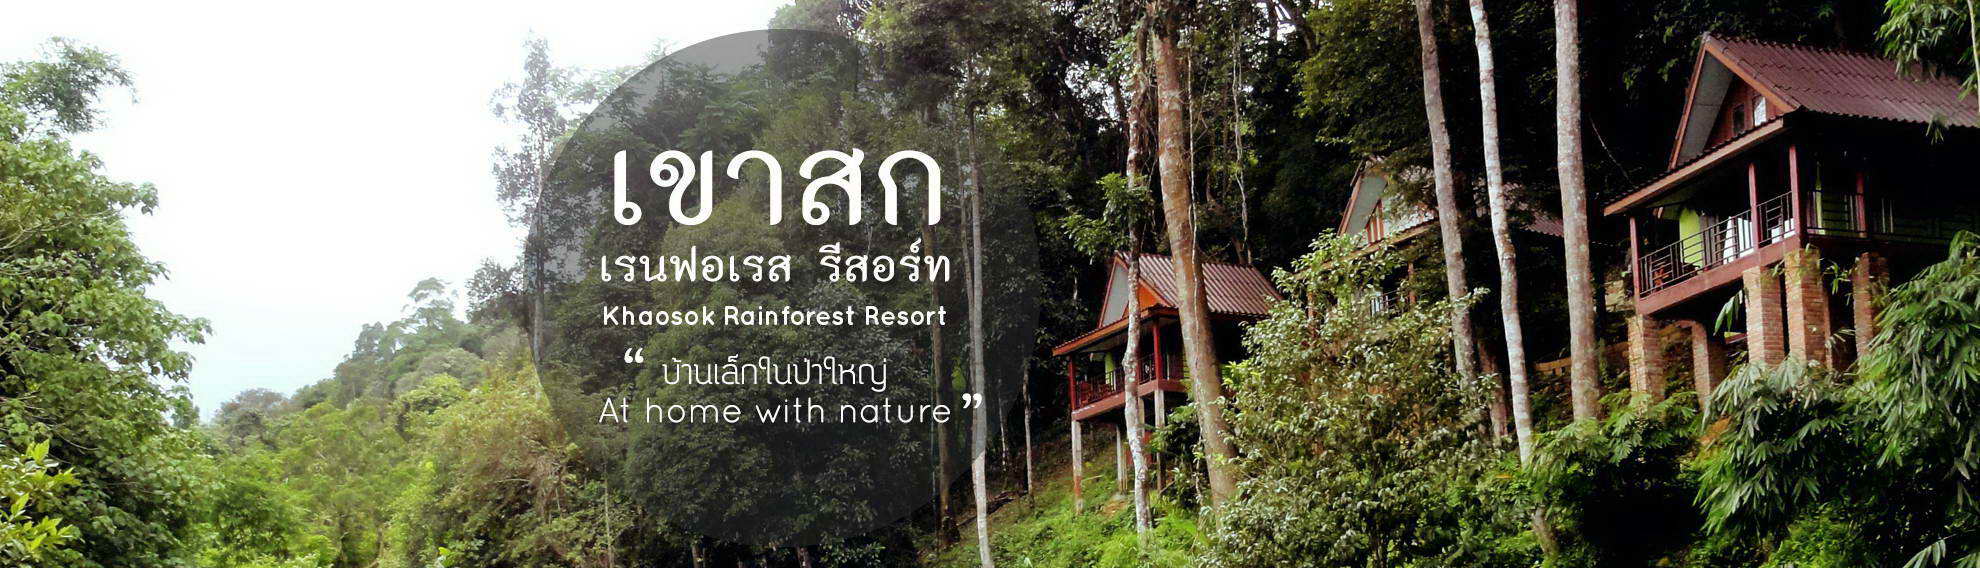 Khaosok Rainforest Resort a fantastic place to spend your holiday in Khaosok National Park